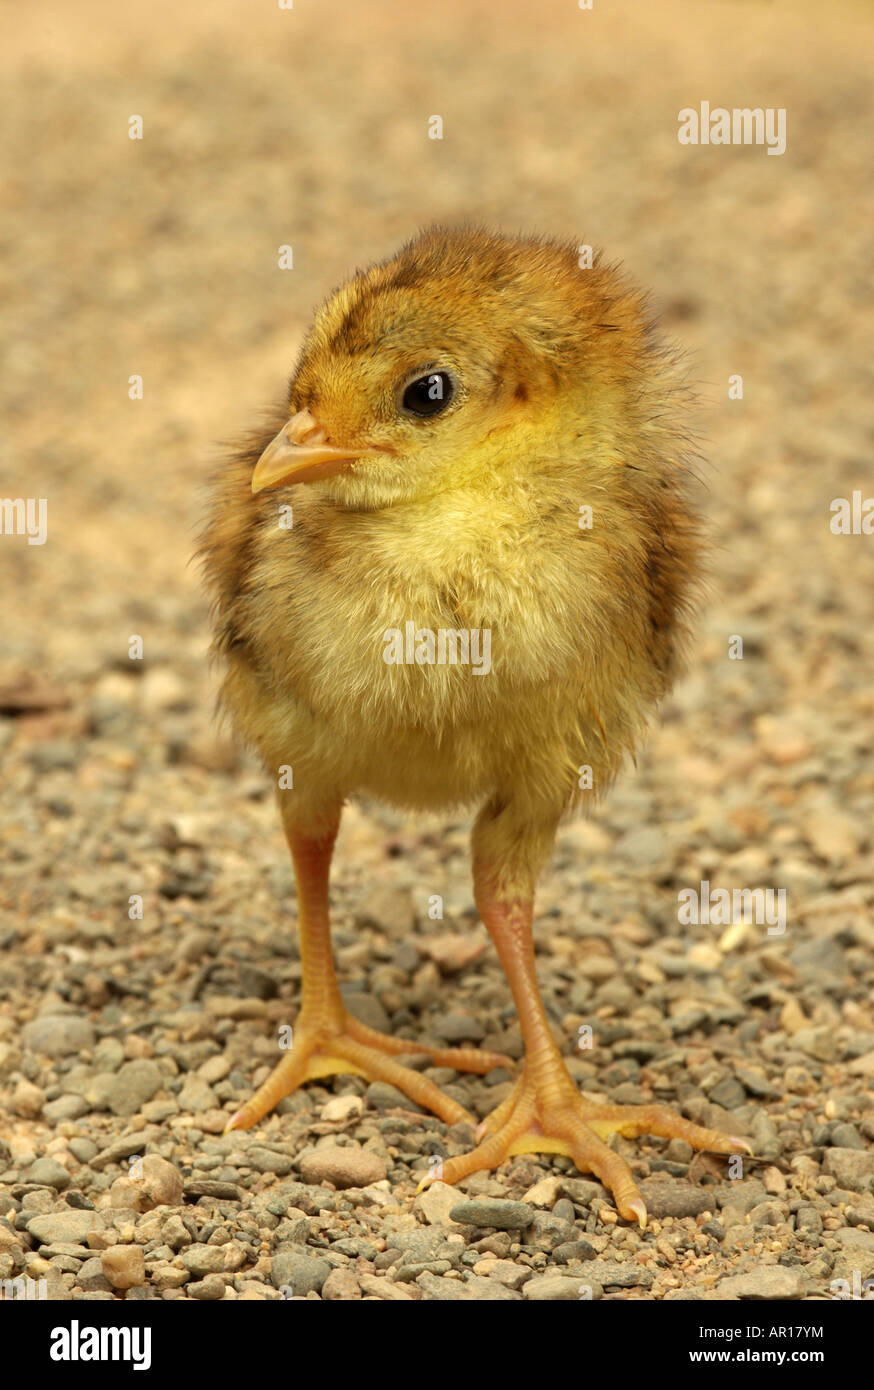 A day old chick of a golden pheasant Chrysolophus pictus. Stock Photo